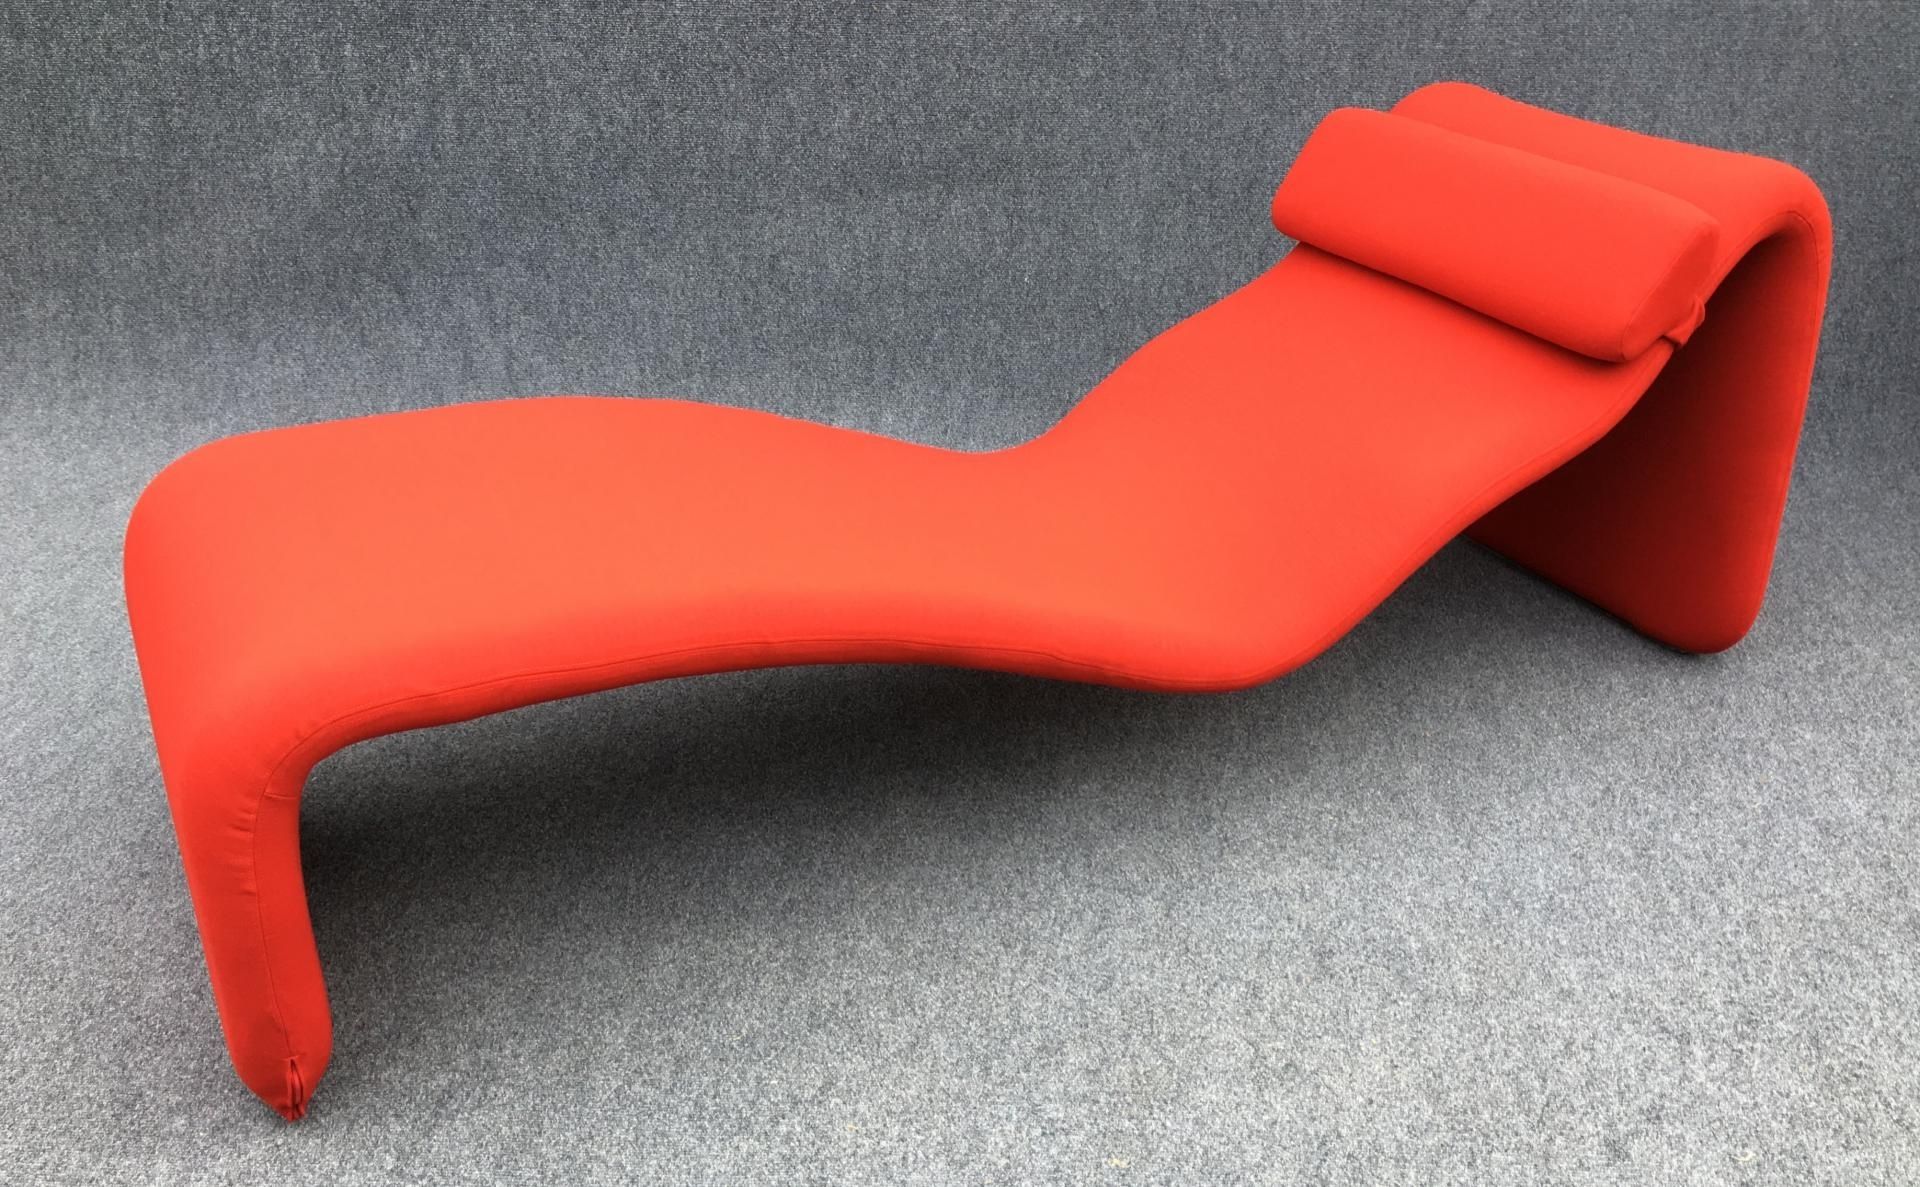 Red Chaises In Recent Red Djinn Chaise Loungeolivier Mourgue For Airborne, 1960s For (View 9 of 15)